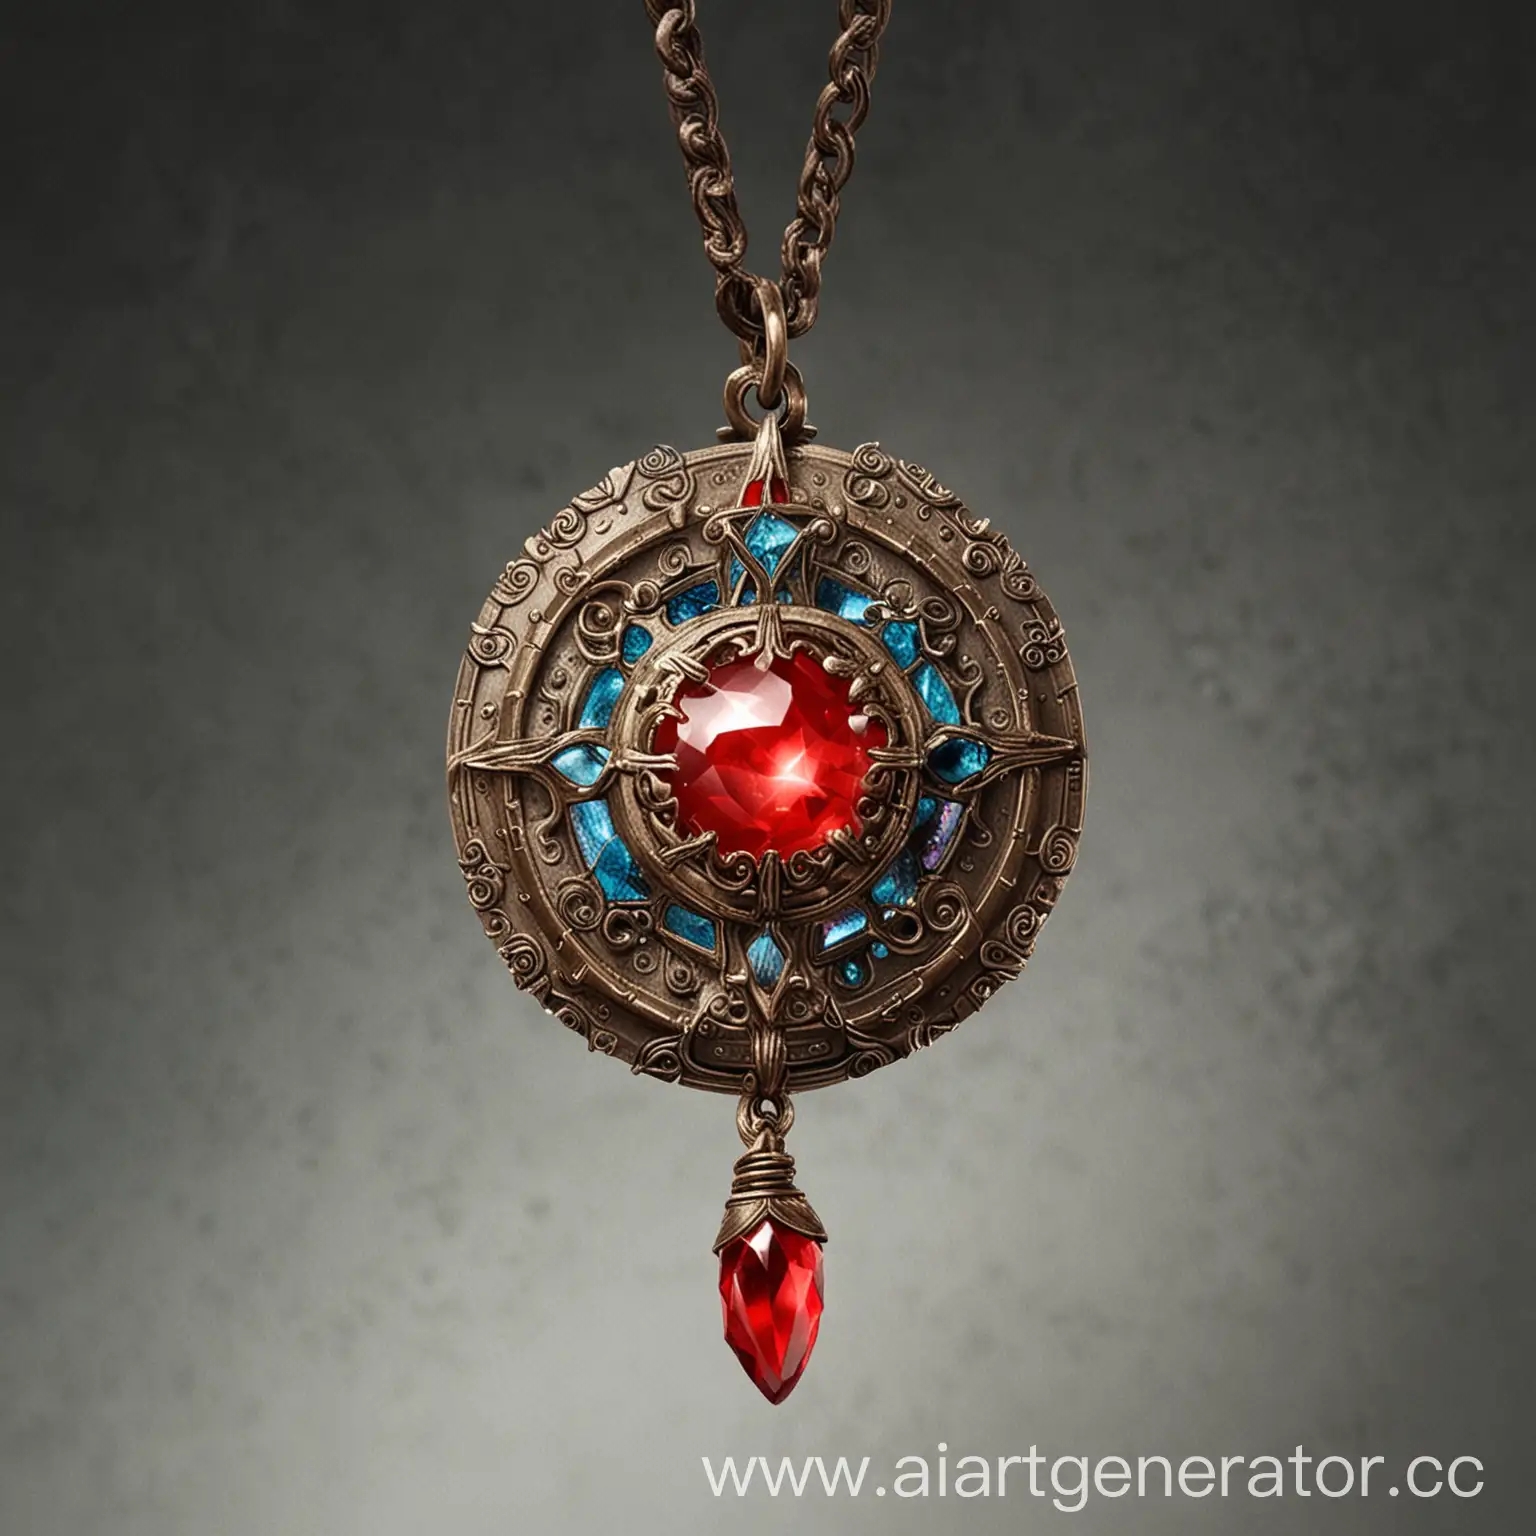 Enchanted-Amulet-of-Power-Glowing-in-Mystic-Aura